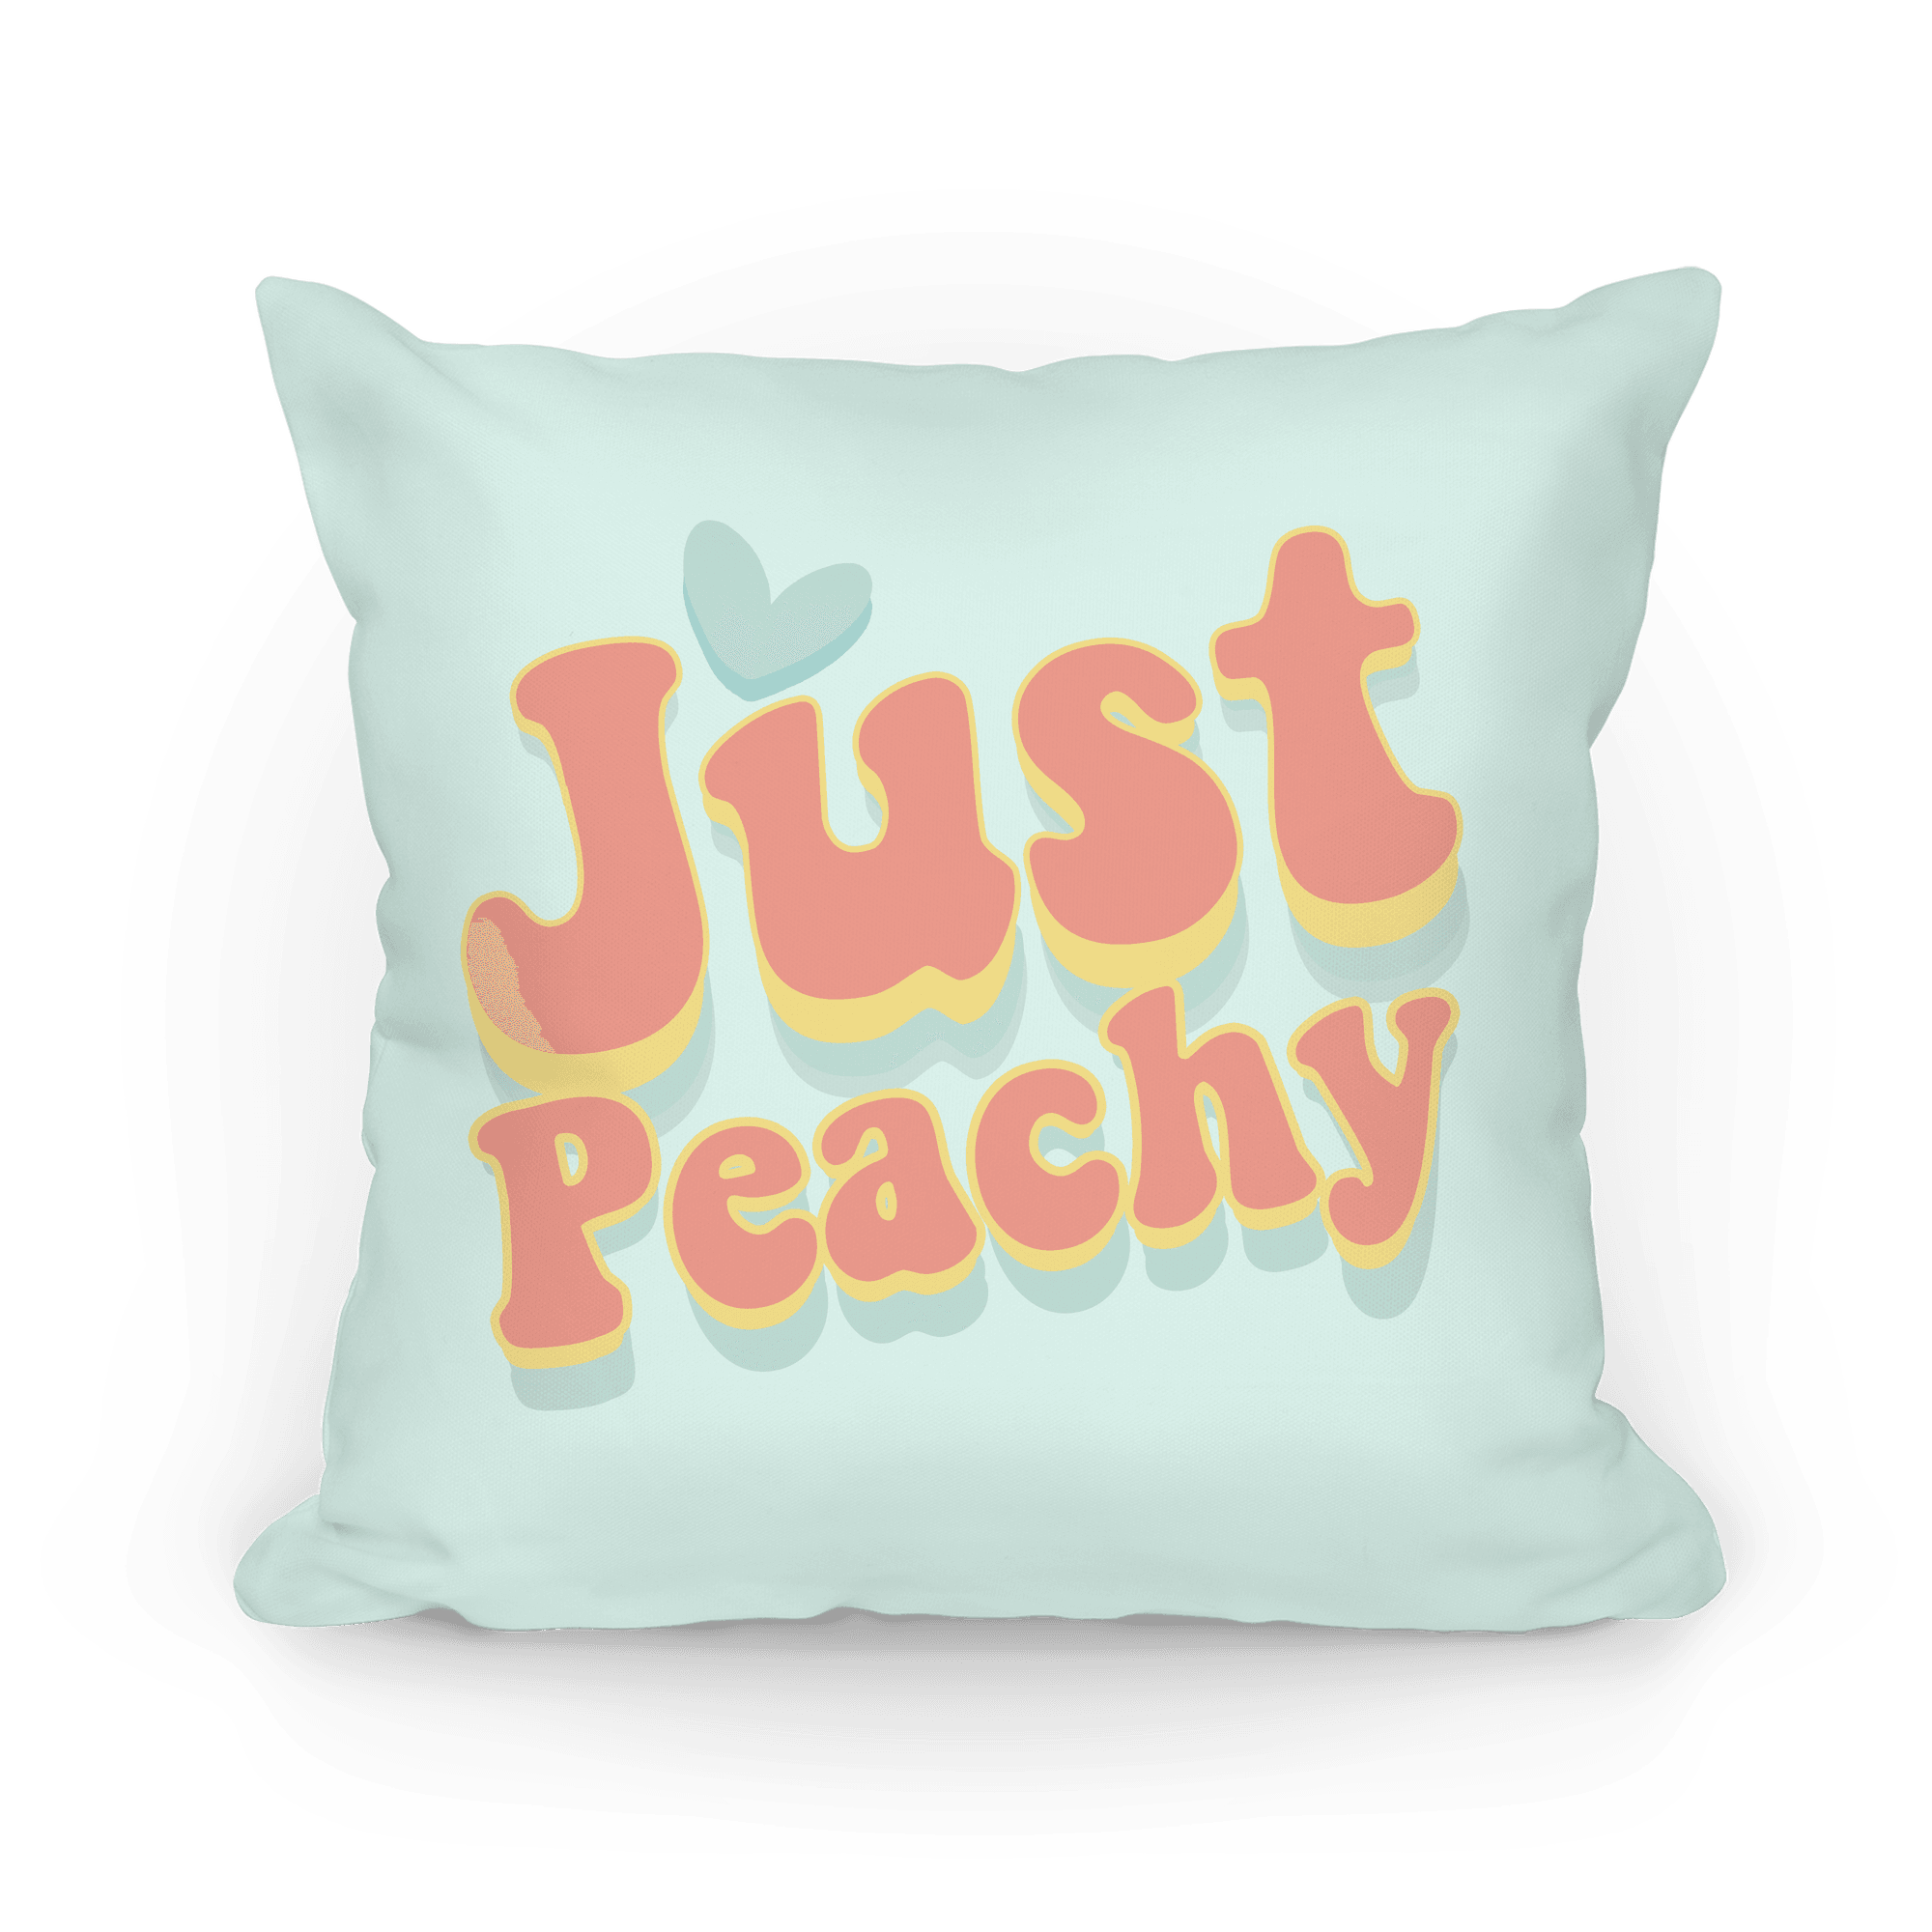 Just Peachy Pillows Lookhuman